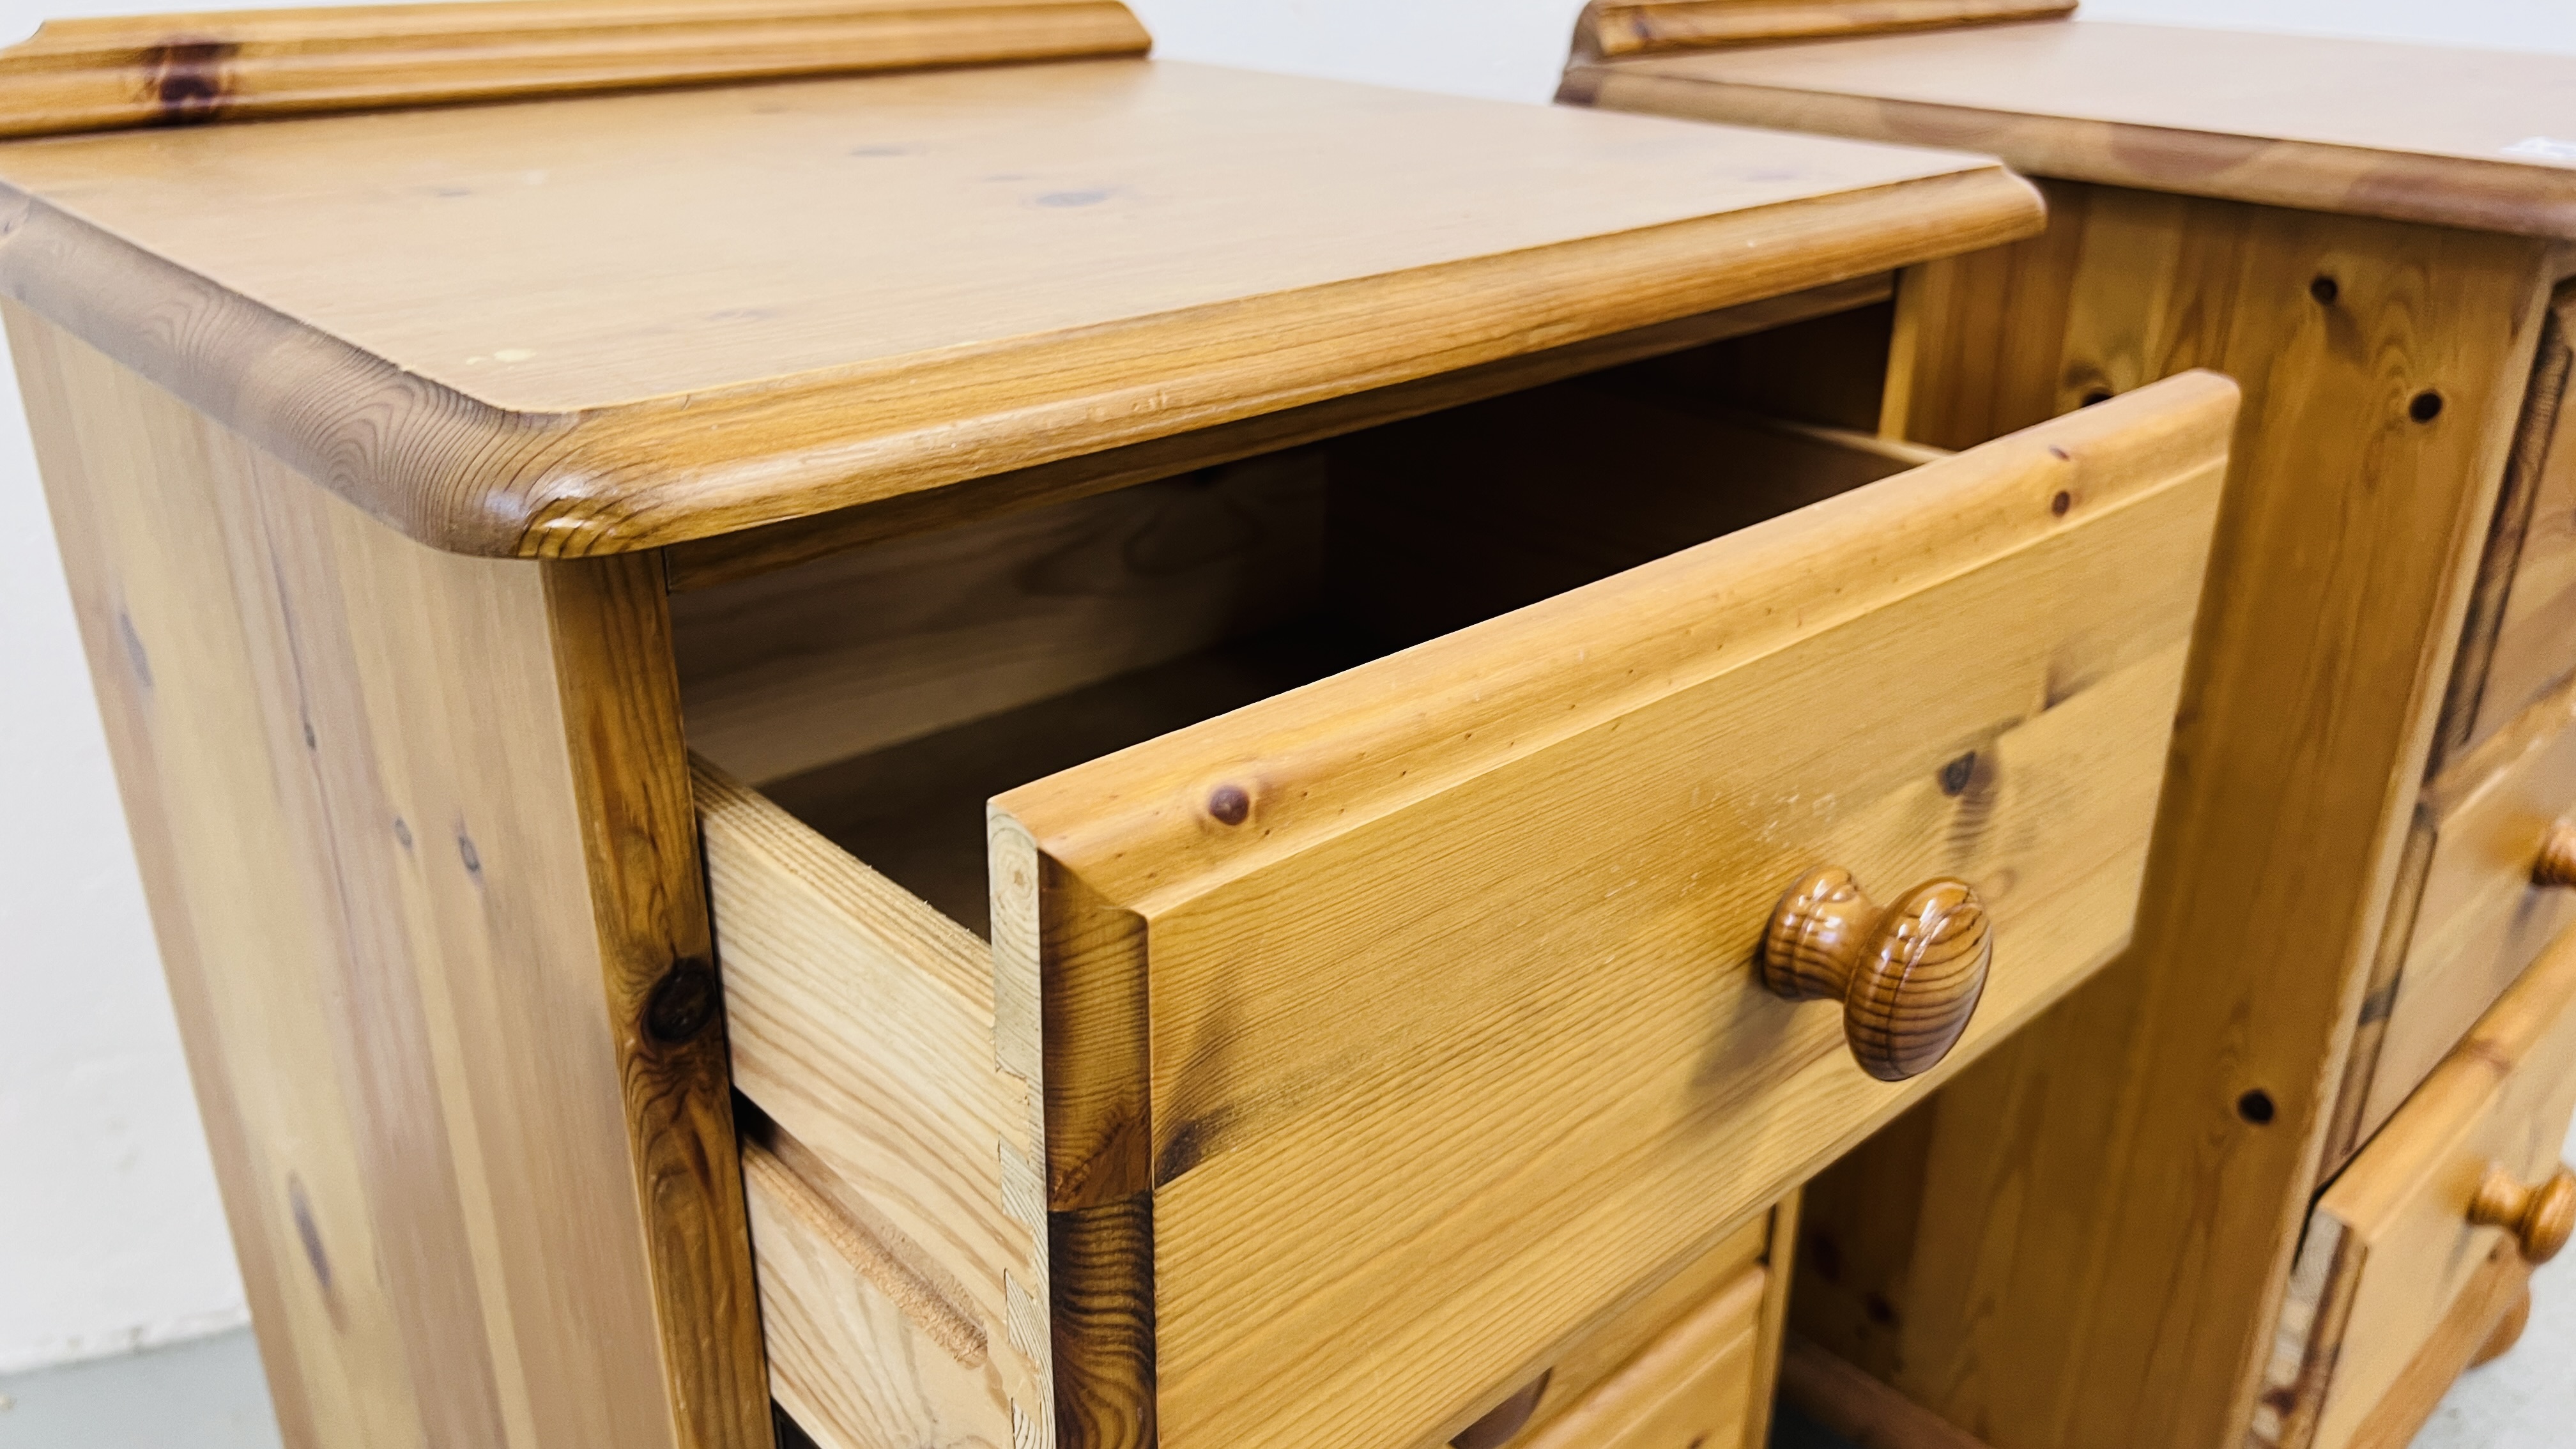 A PAIR OF GOOD QUALITY HONEY PINE THREE DRAWER BEDSIDE CABINETS WIDTH 46CM. DEPTH 40CM. HEIGHT 70CM. - Image 6 of 6